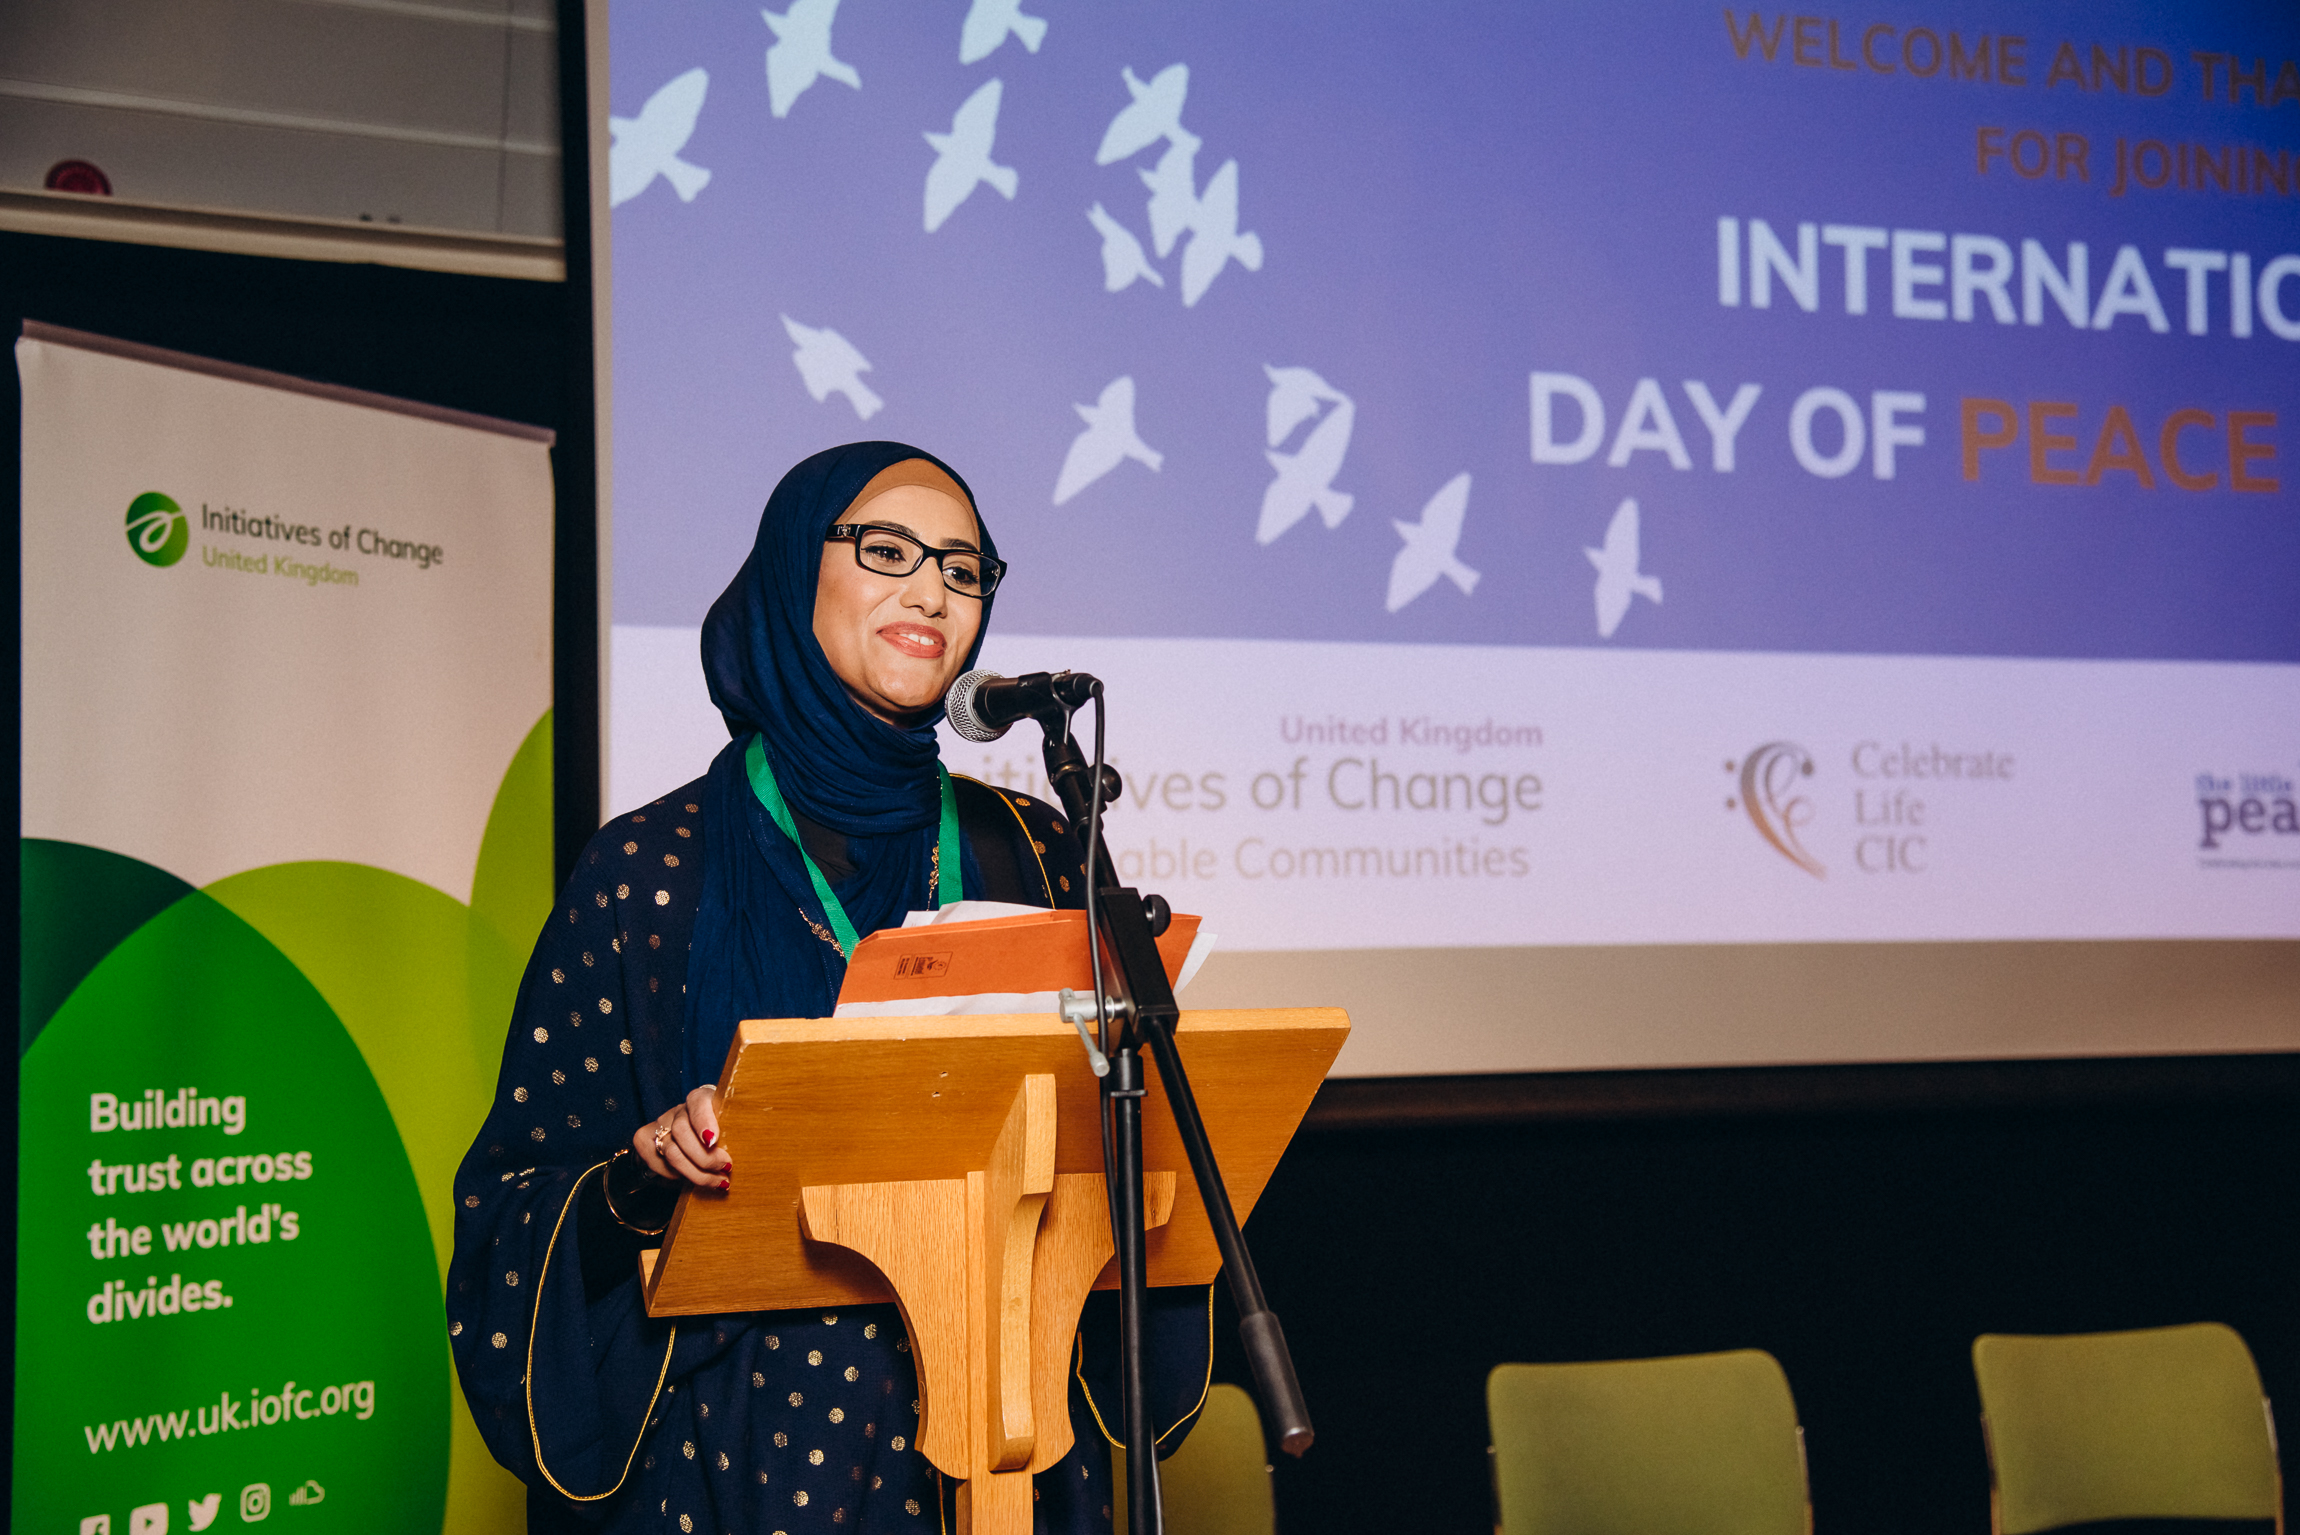 Amina Khalid, Head of Initiatives of Change UK’s Sustainable Communities Programme and Peace Begins at Home, spoke about the approach IofC UK takes to peace building